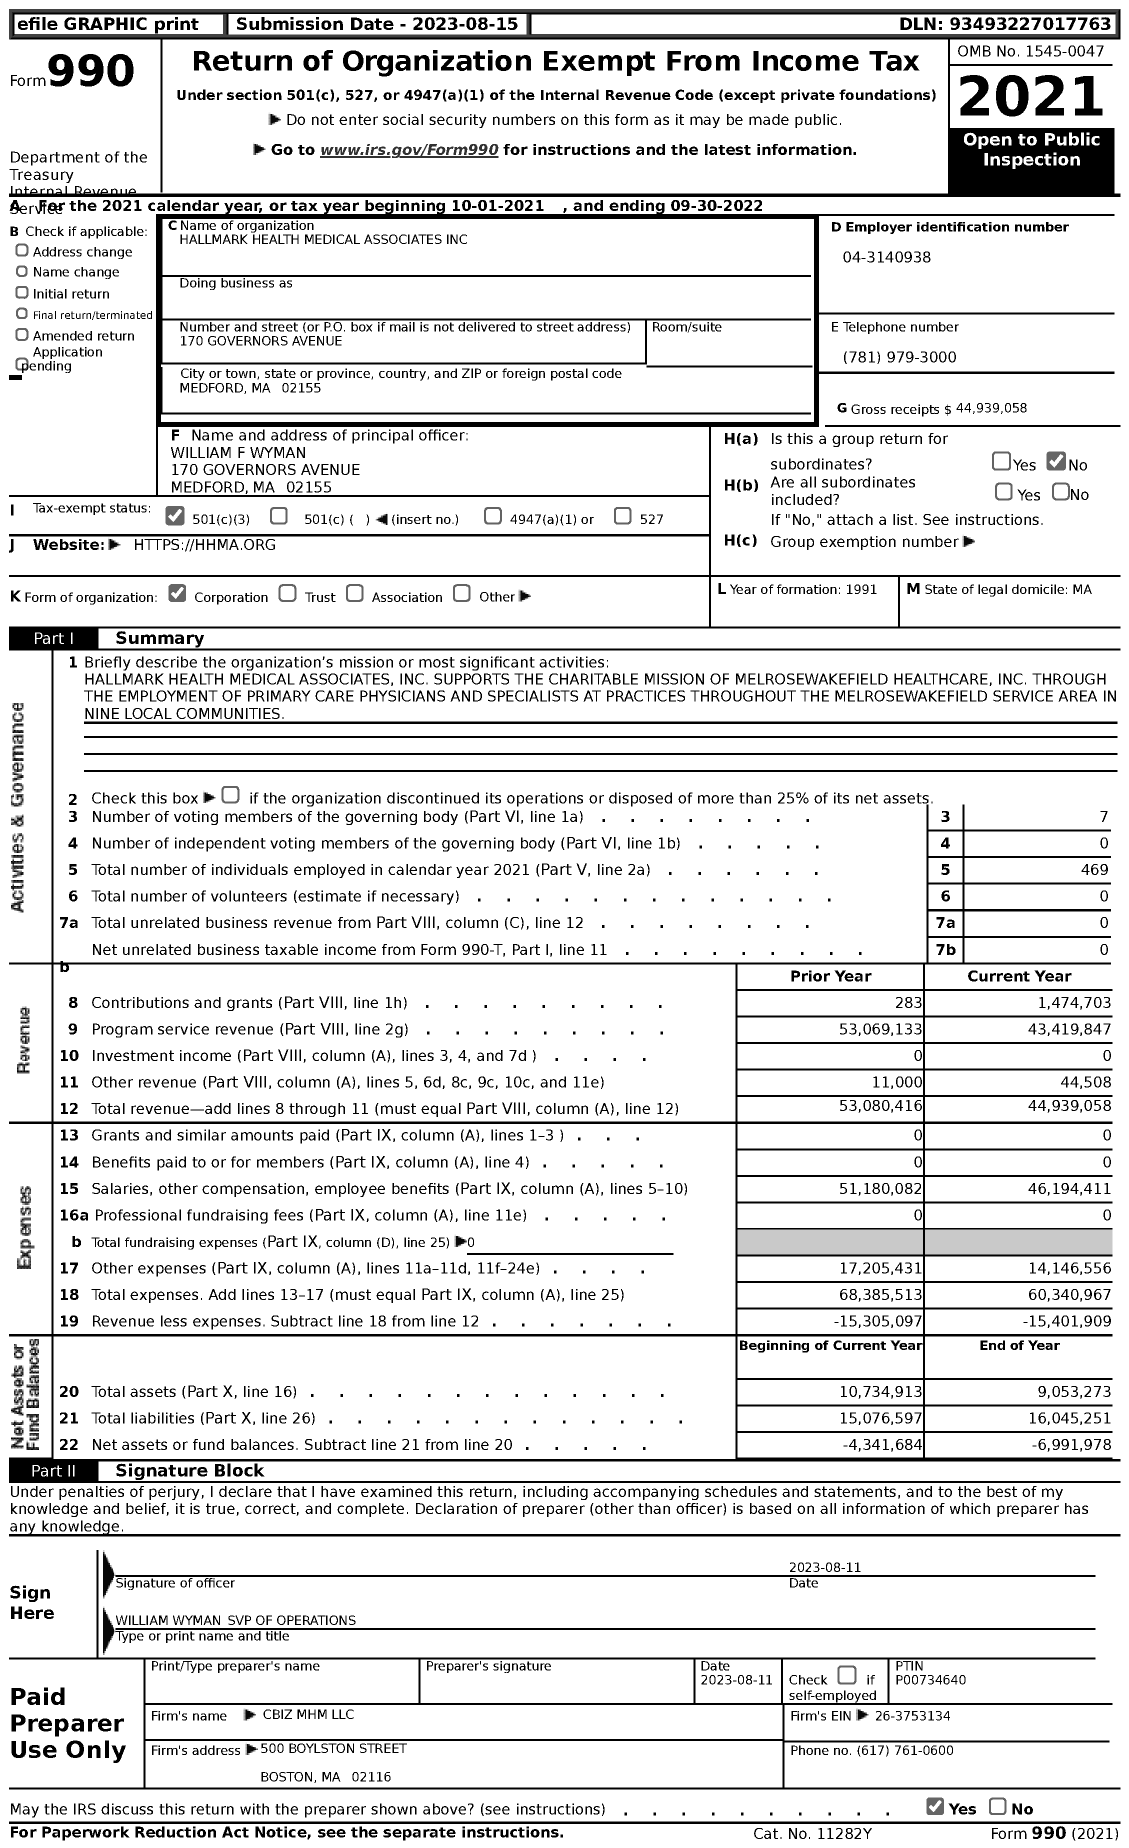 Image of first page of 2021 Form 990 for Hallmark Health Medical Associates (HHMA)